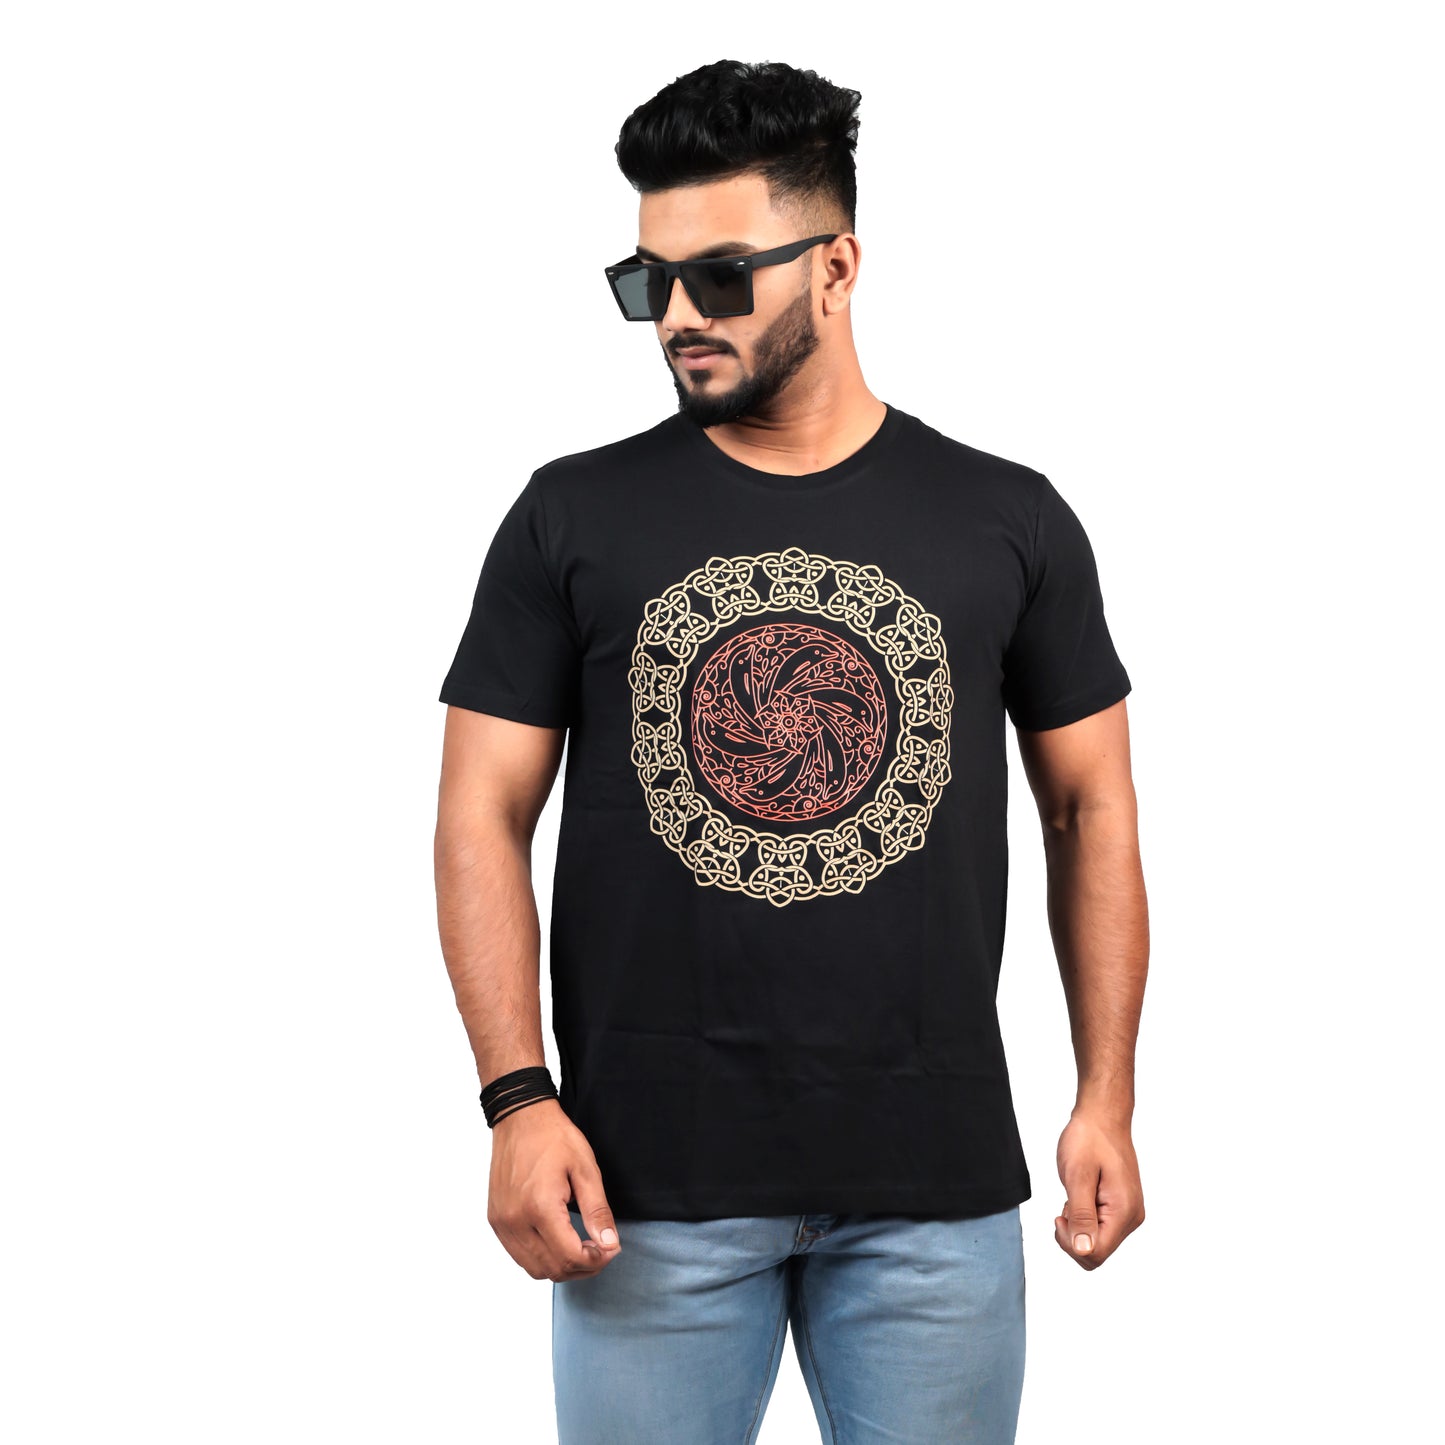 Nirvana Dolphin Printed T-shirt In Black Color For Men